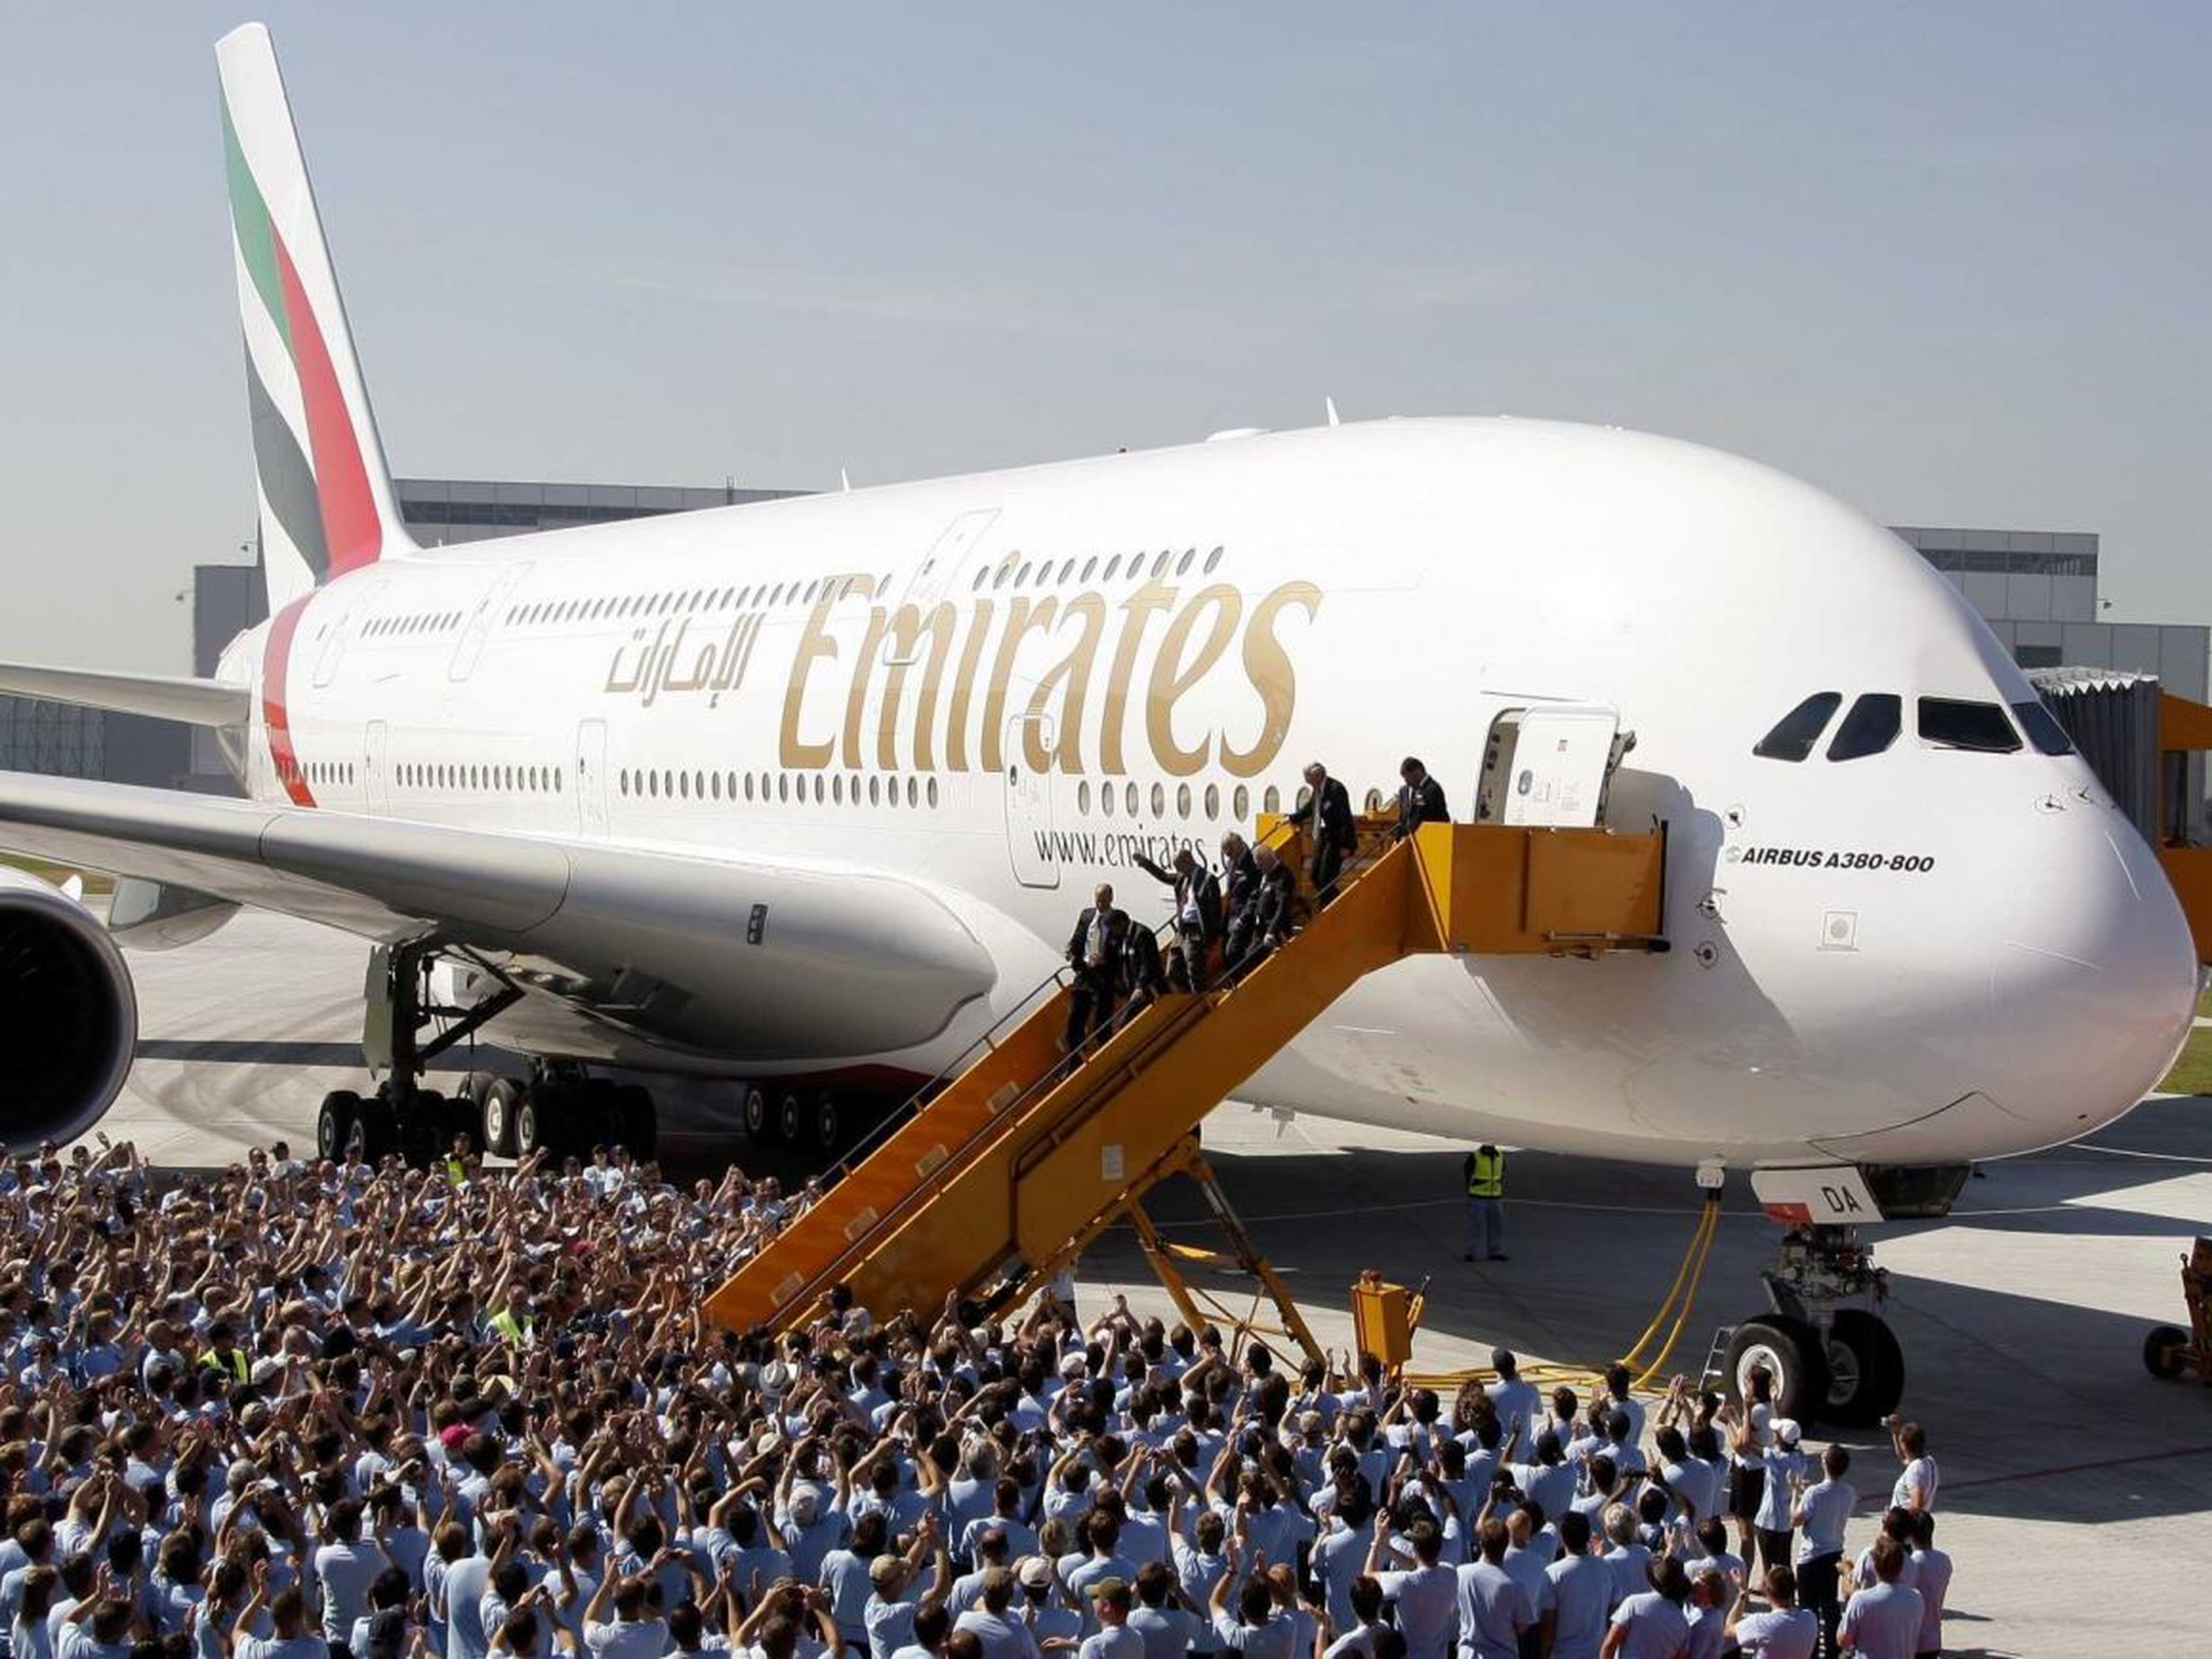 As a result, Emirates needs an aircraft that can carry a lot of passengers for very long distances — a perfect job for the A380.